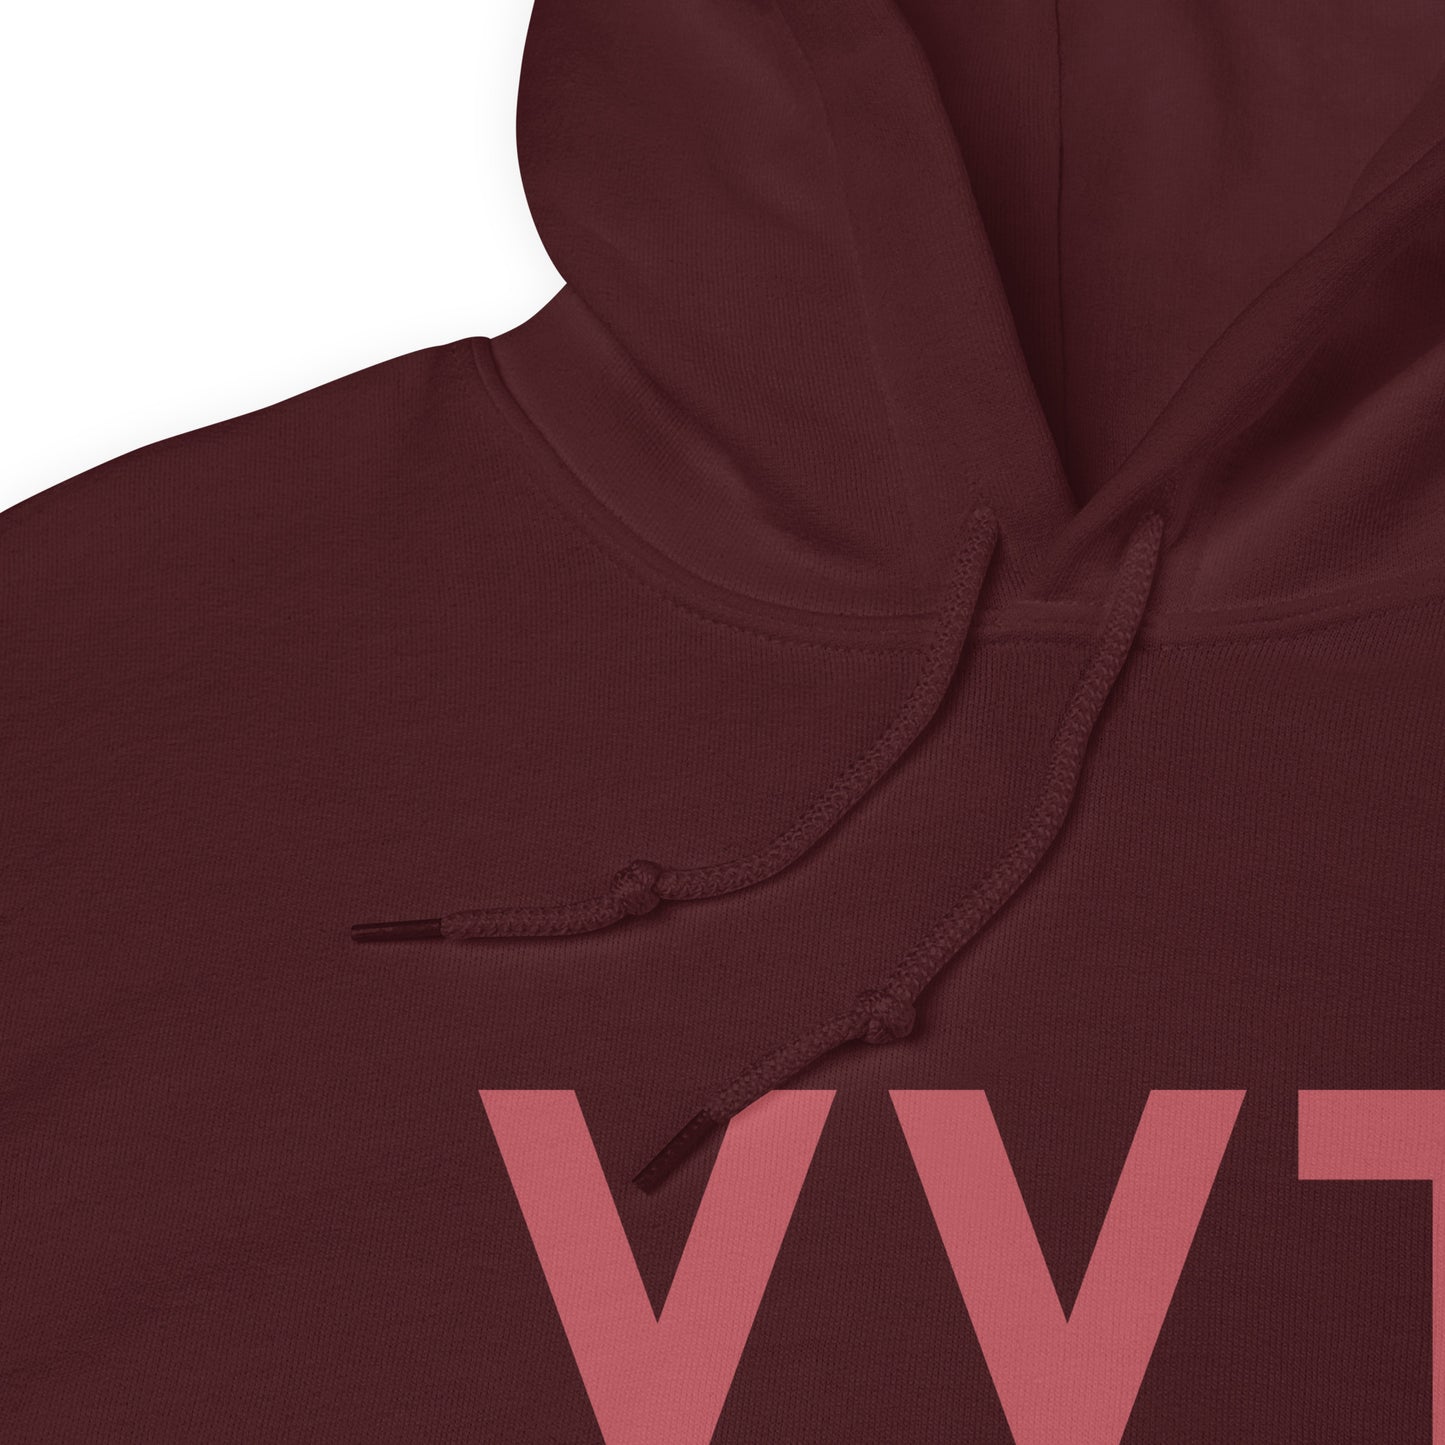 Aviation Enthusiast Hoodie - Deep Pink Graphic • YYT St. John's • YHM Designs - Image 08